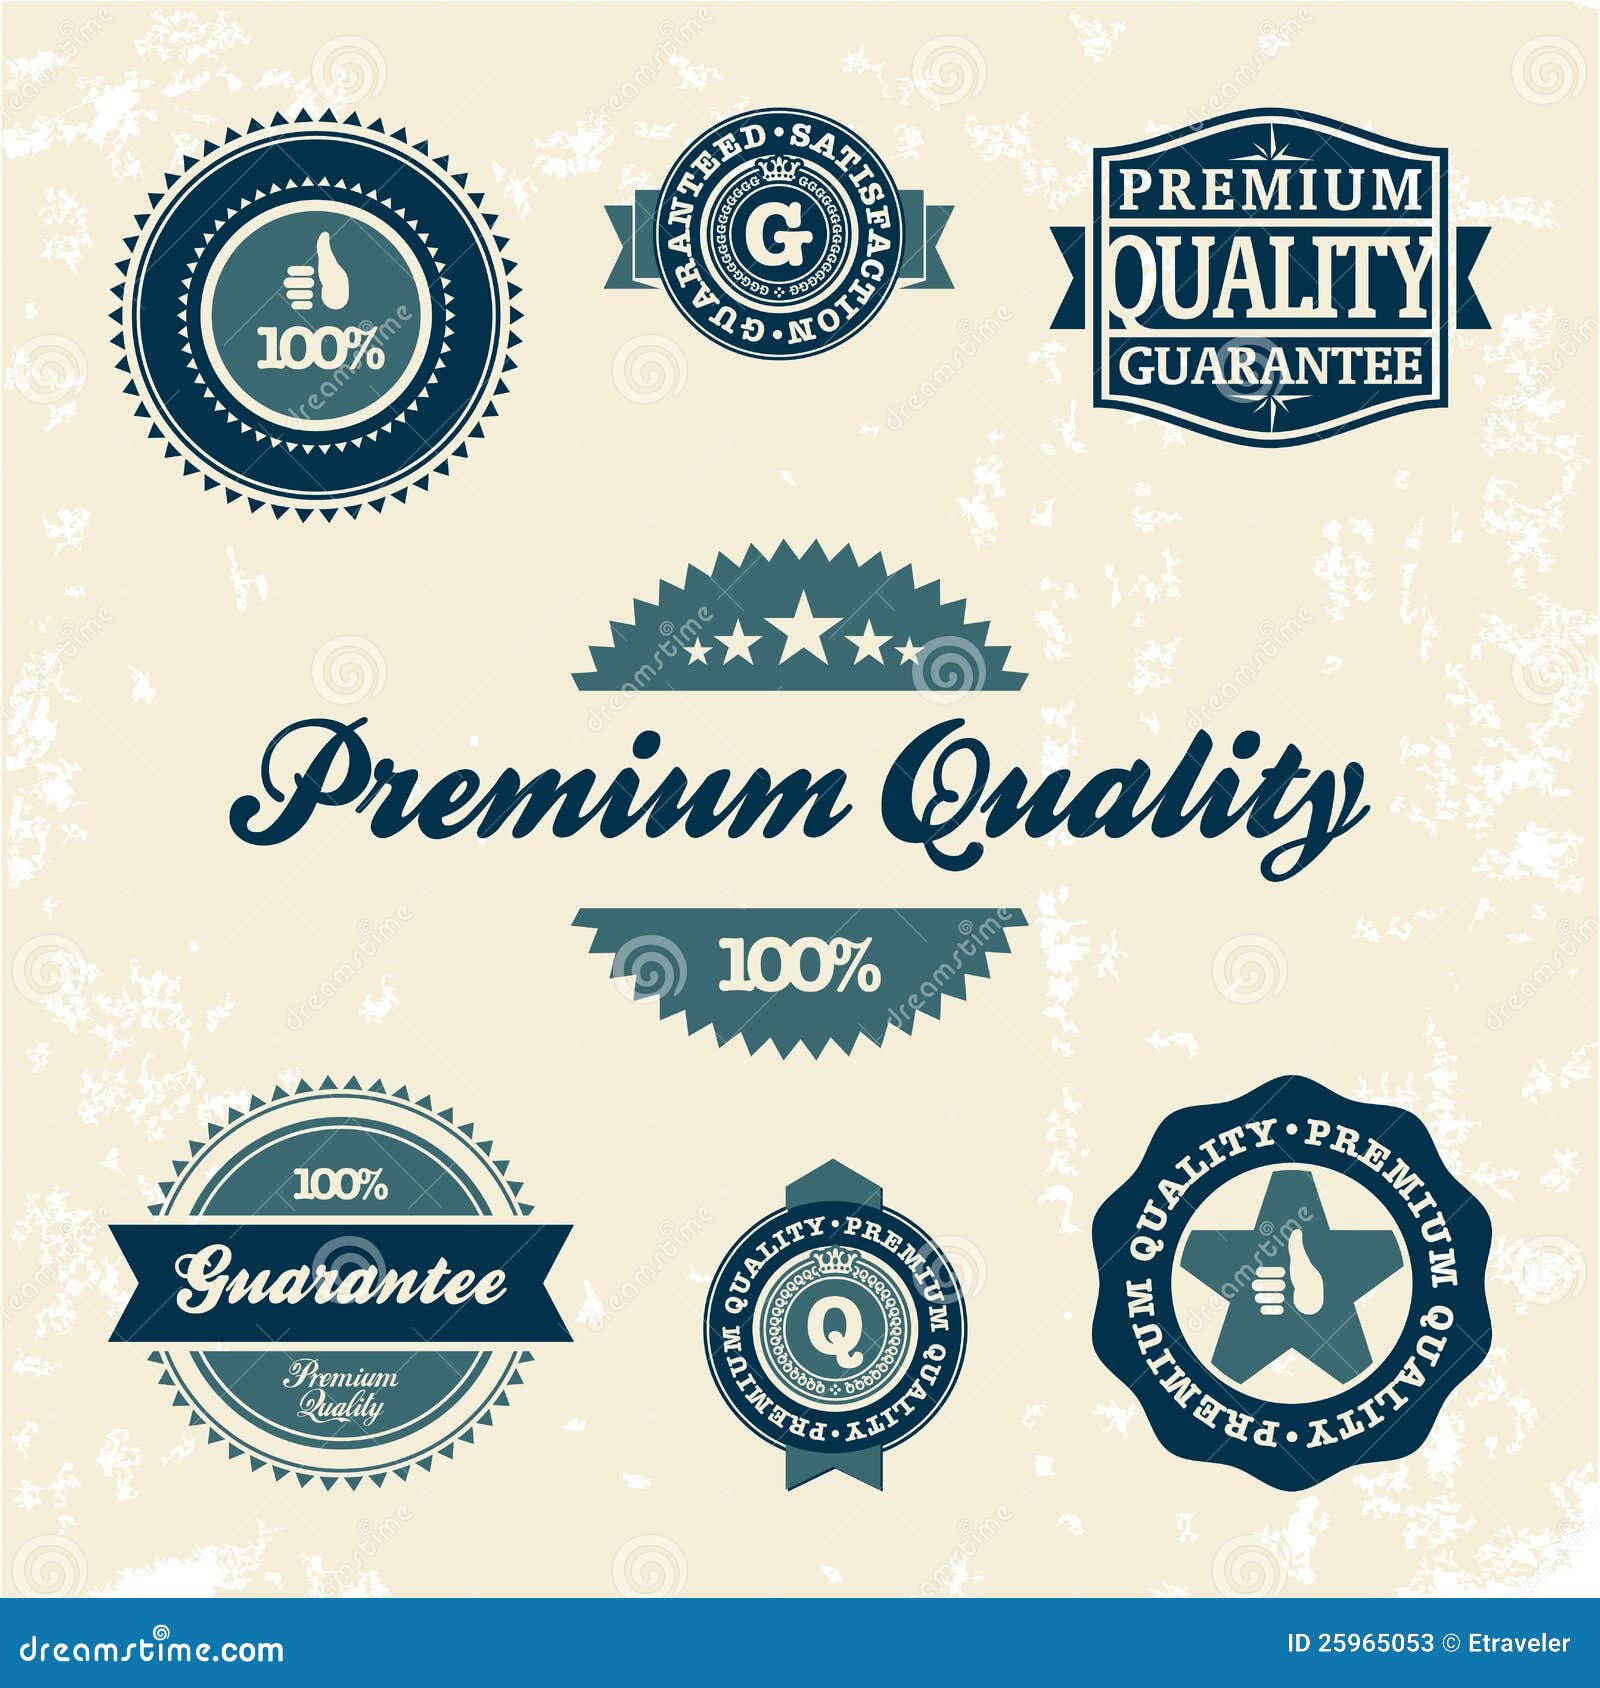 Collection of Premium Quality and Guarantee Labels retro vintage style design. 100 Premium Quality Guarantee vector sign set.